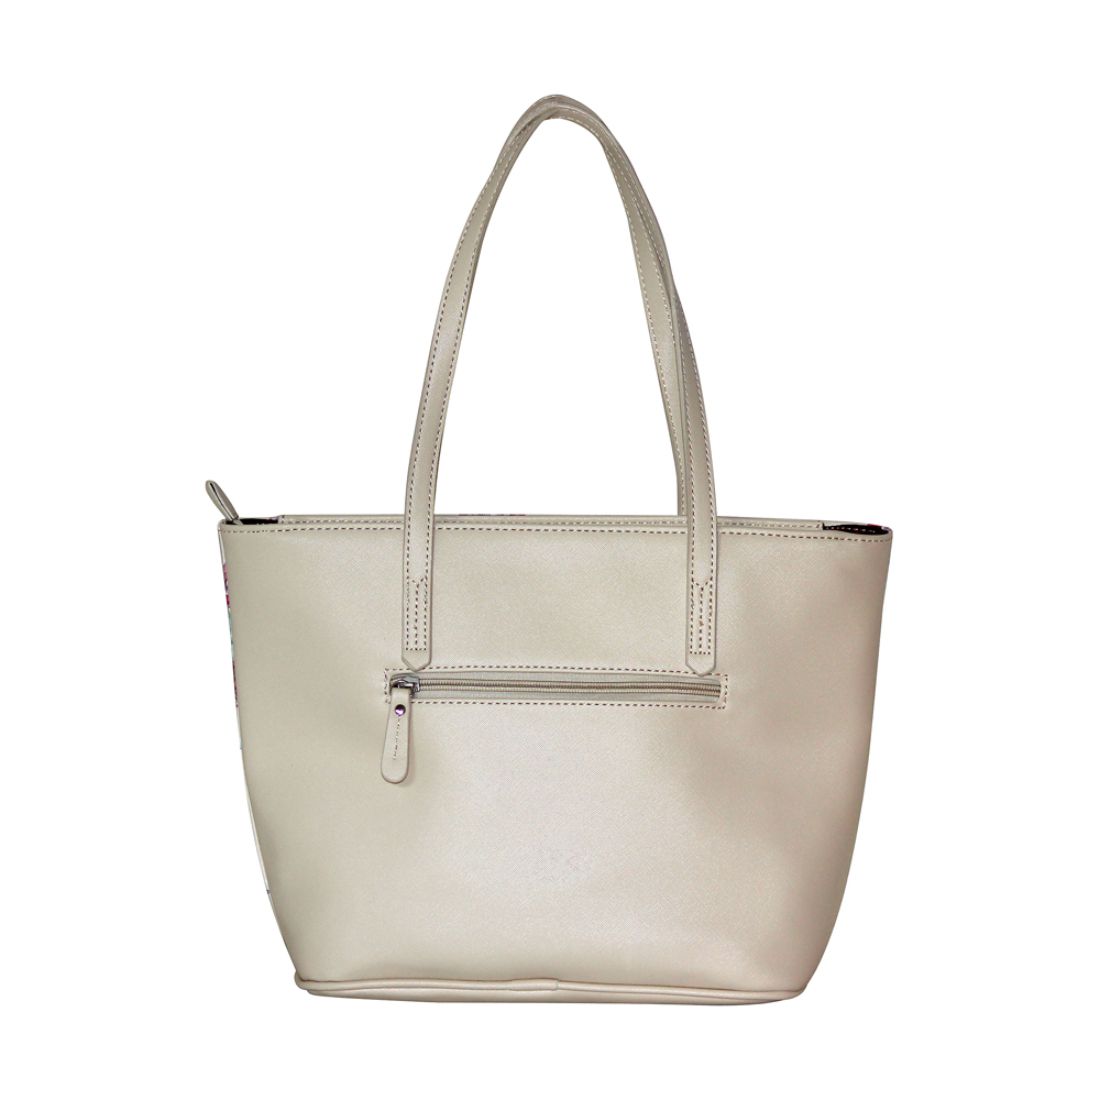 Caprese White Faux Leather Tote Bag - Buy Caprese White Faux Leather ...